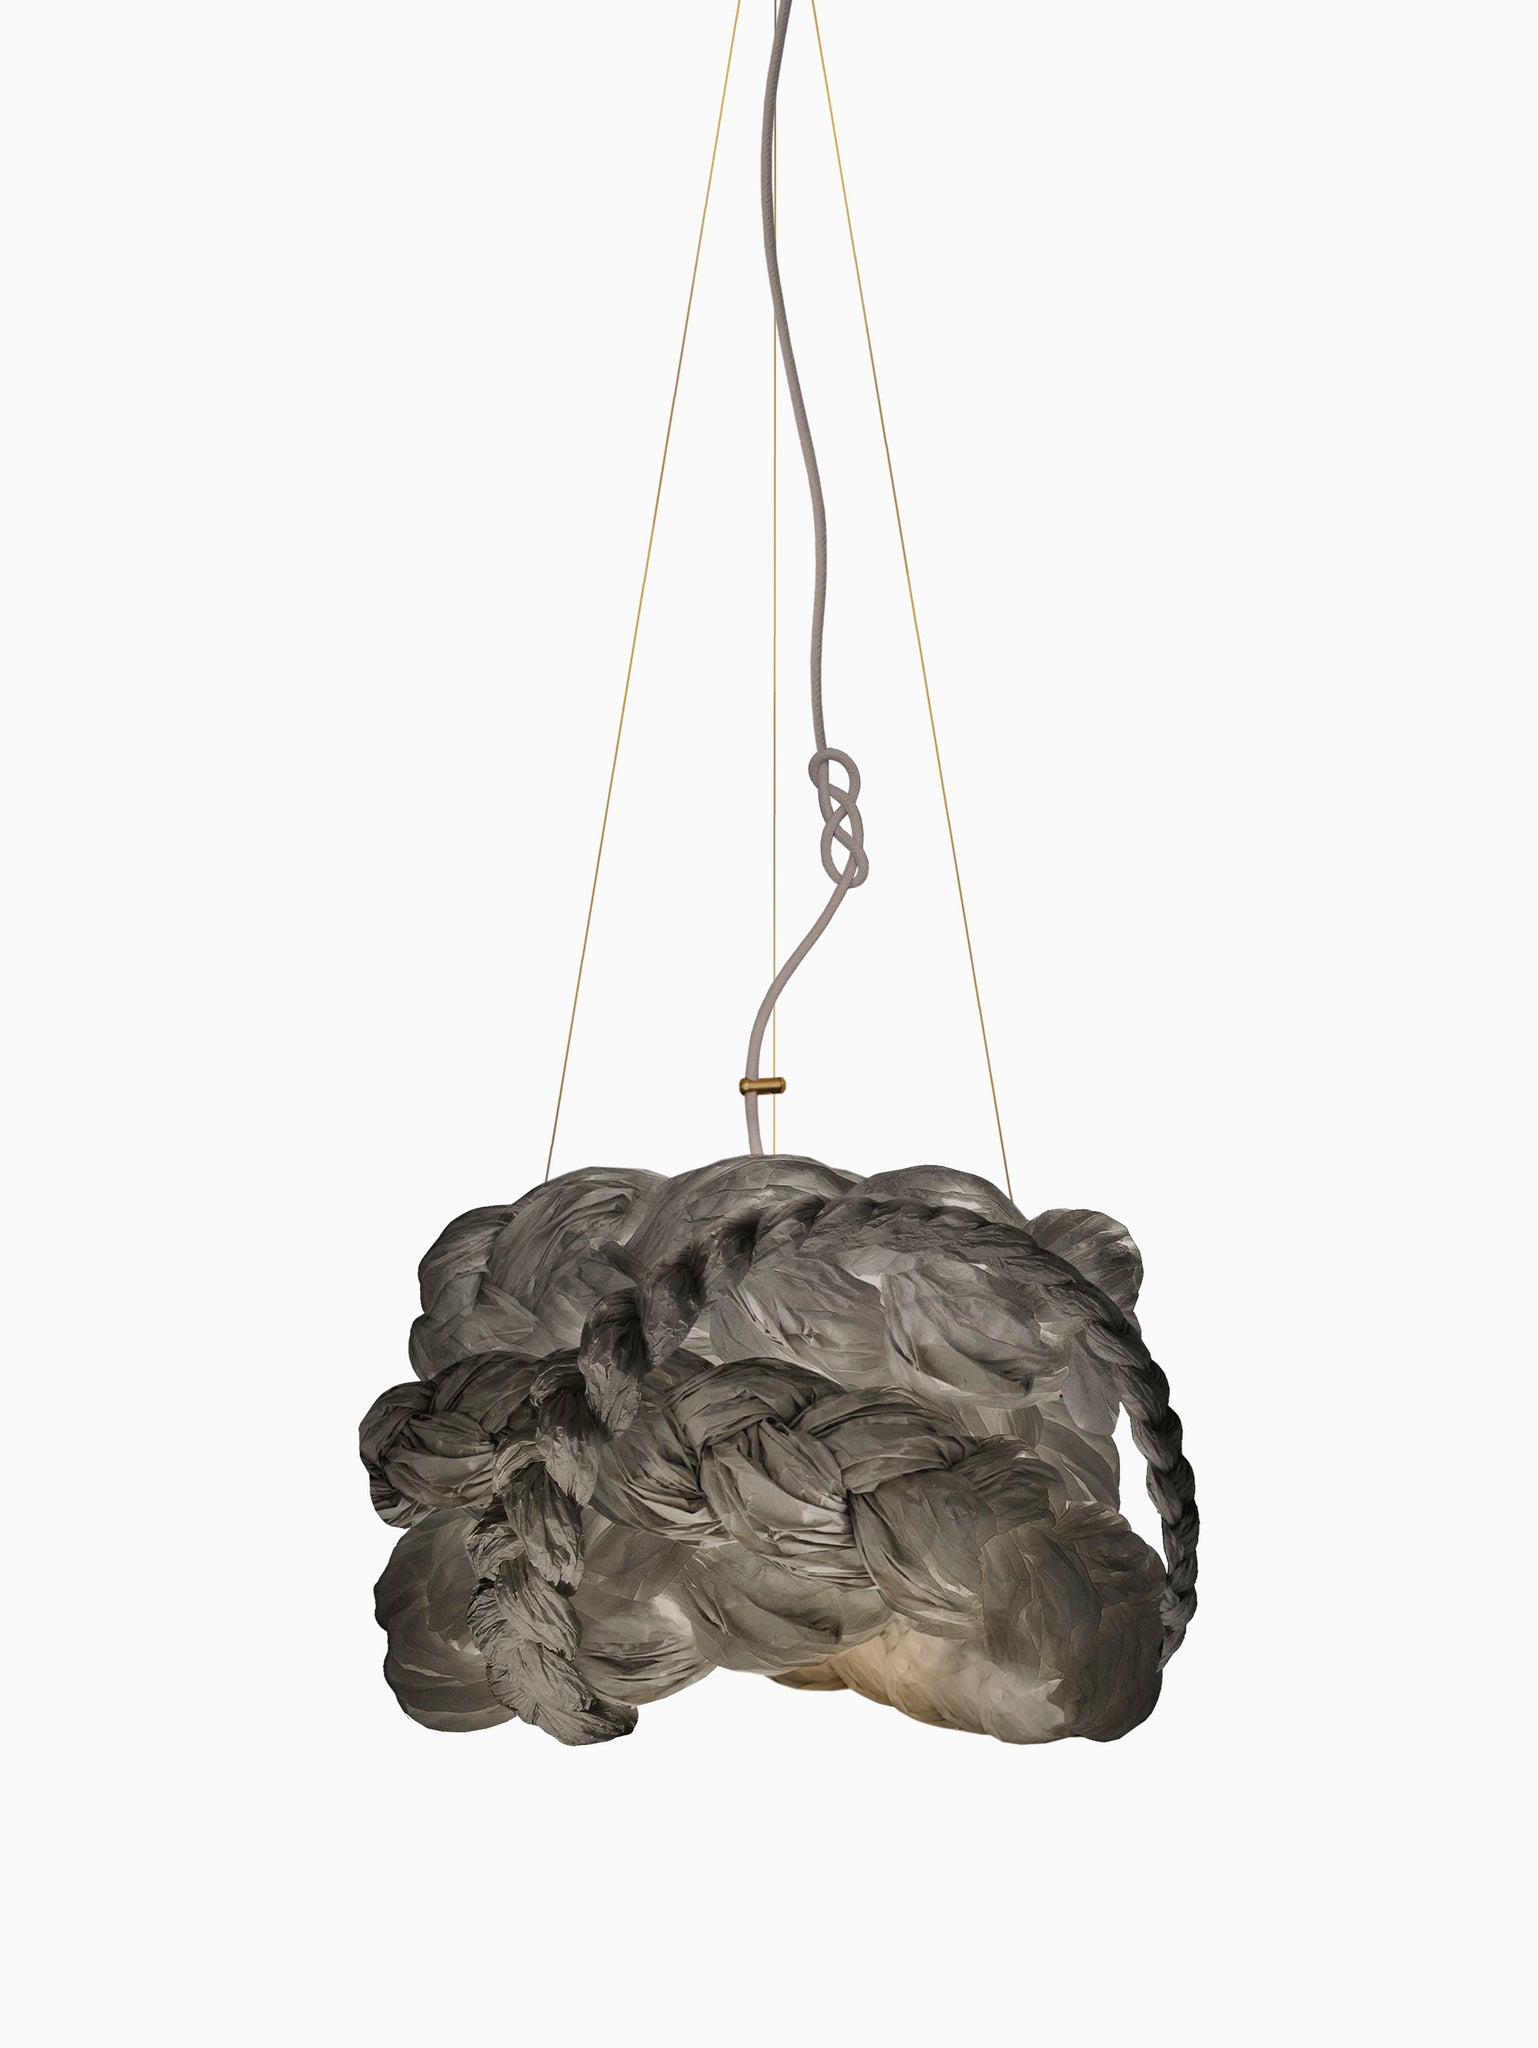 Graphite Paper Braided Unique Handmade Pendant Lamp | Cozy Atmosphere Lighting | Contemporary Natural Lighting for Living room,  Bedroom & Lobby | Sustainable Design Lighting | mammalampa The Bride suspension lamp S